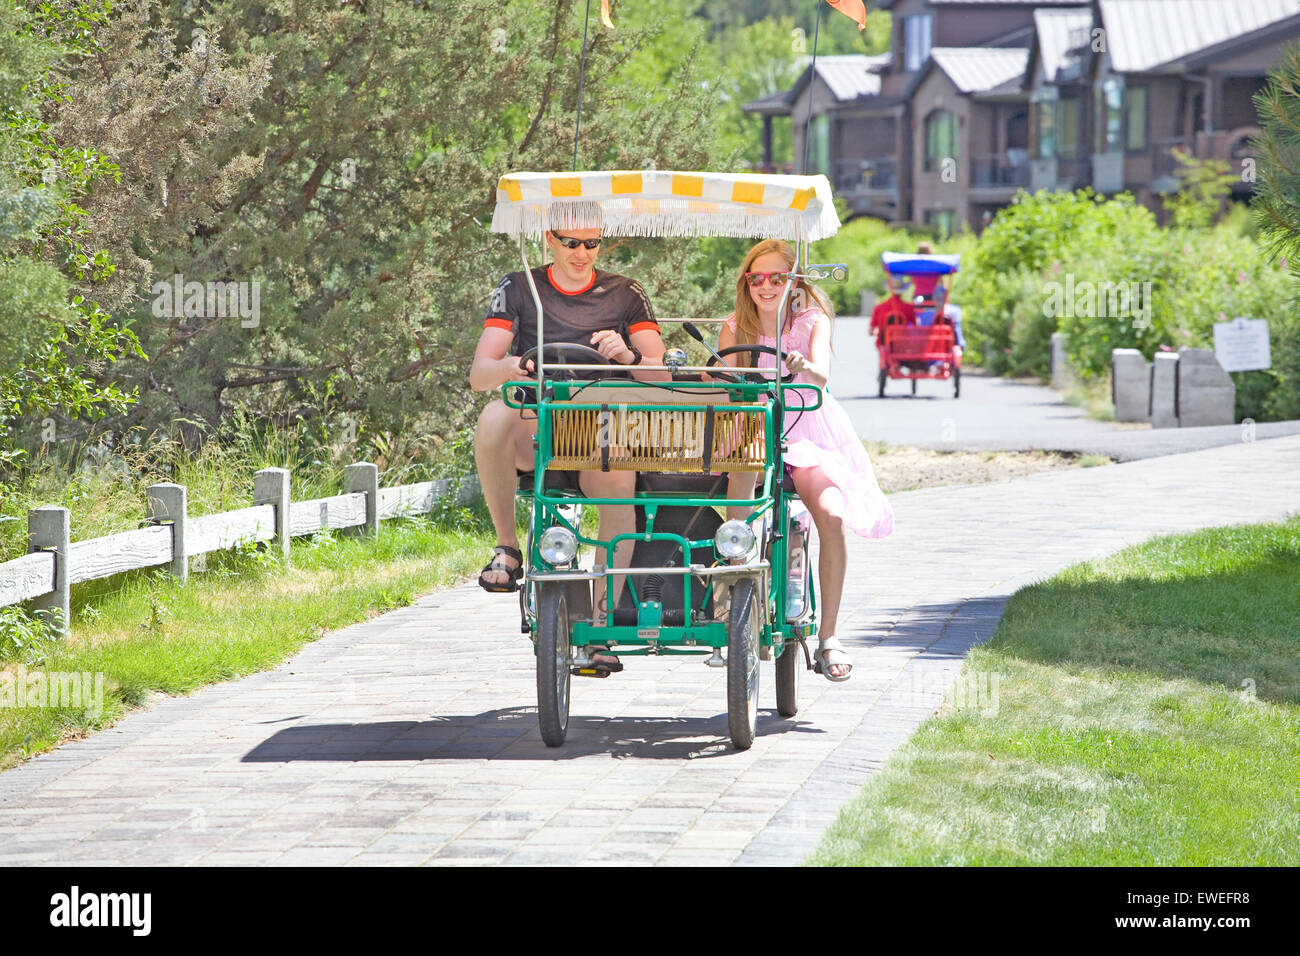 A family outing on a bicycle cart on a summer day along the Deschutes River in Bend, Oregon Stock Photo